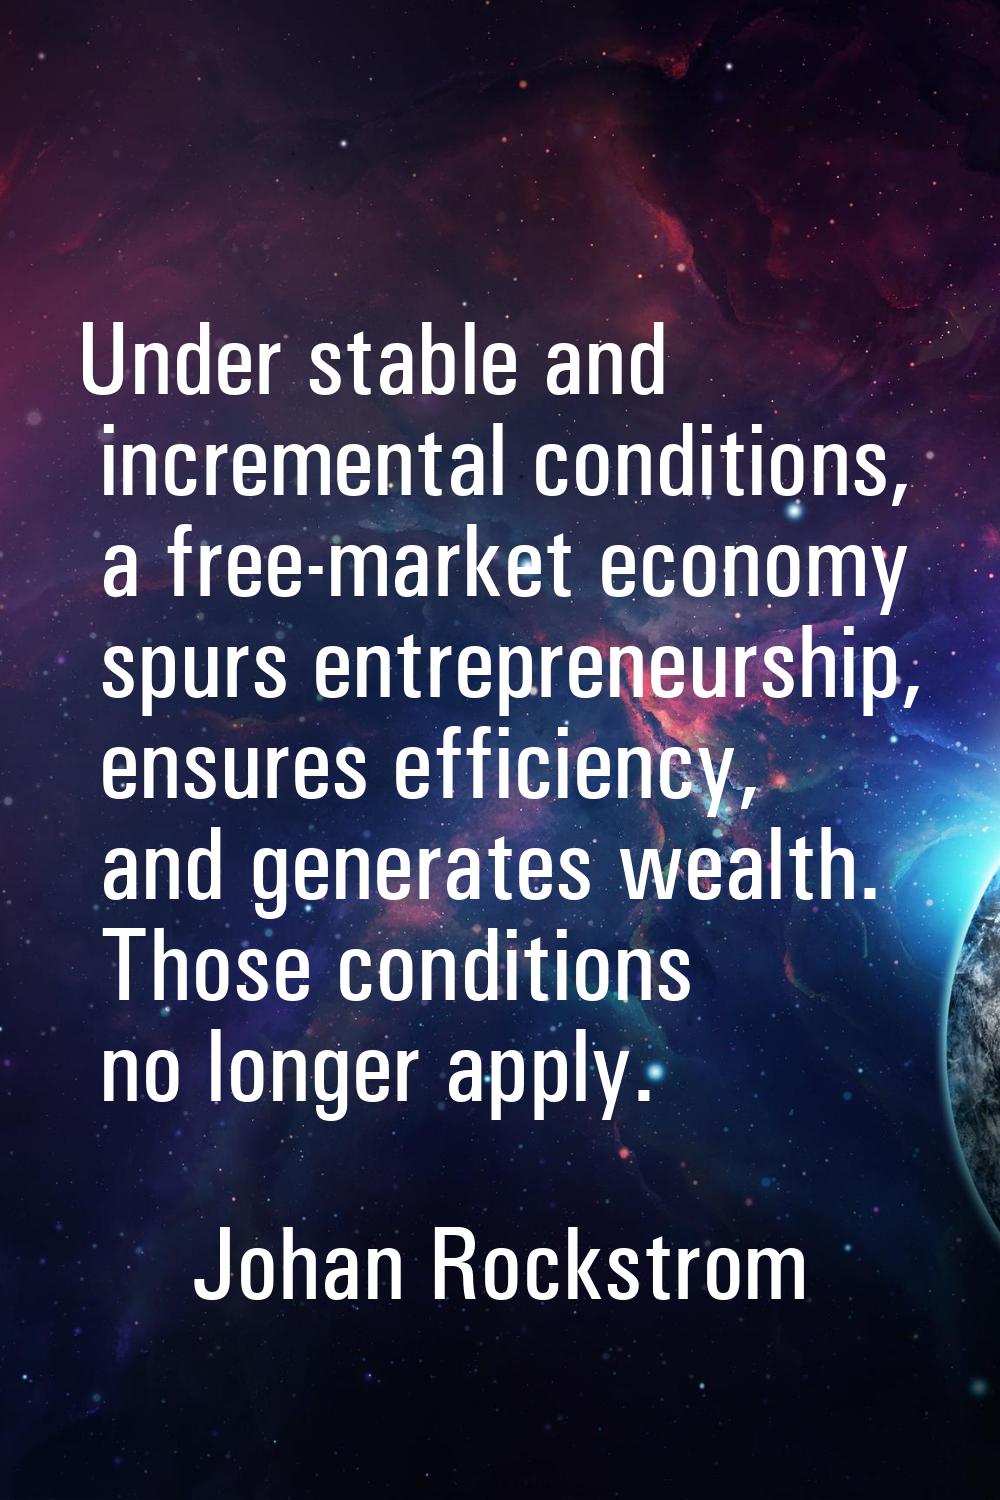 Under stable and incremental conditions, a free-market economy spurs entrepreneurship, ensures effi